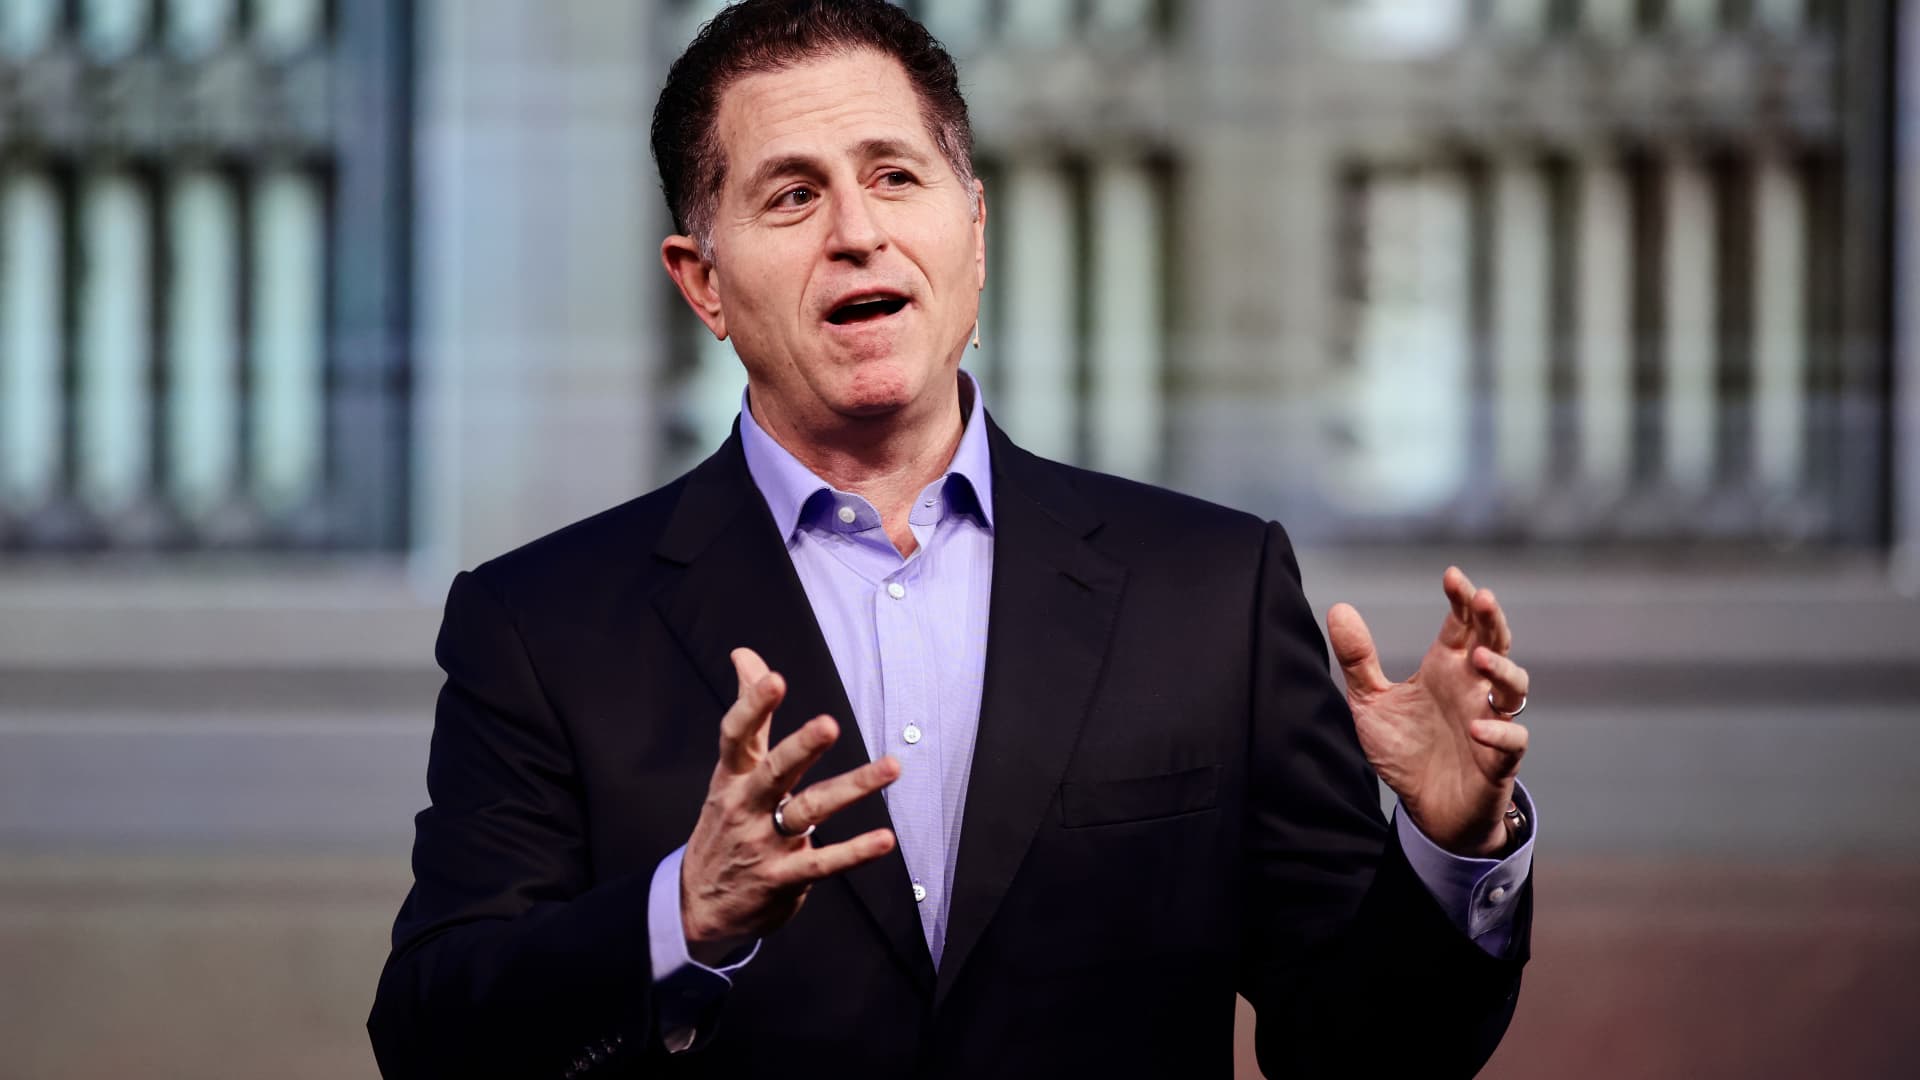 Dell stock surges on optimism it has big AI server orders